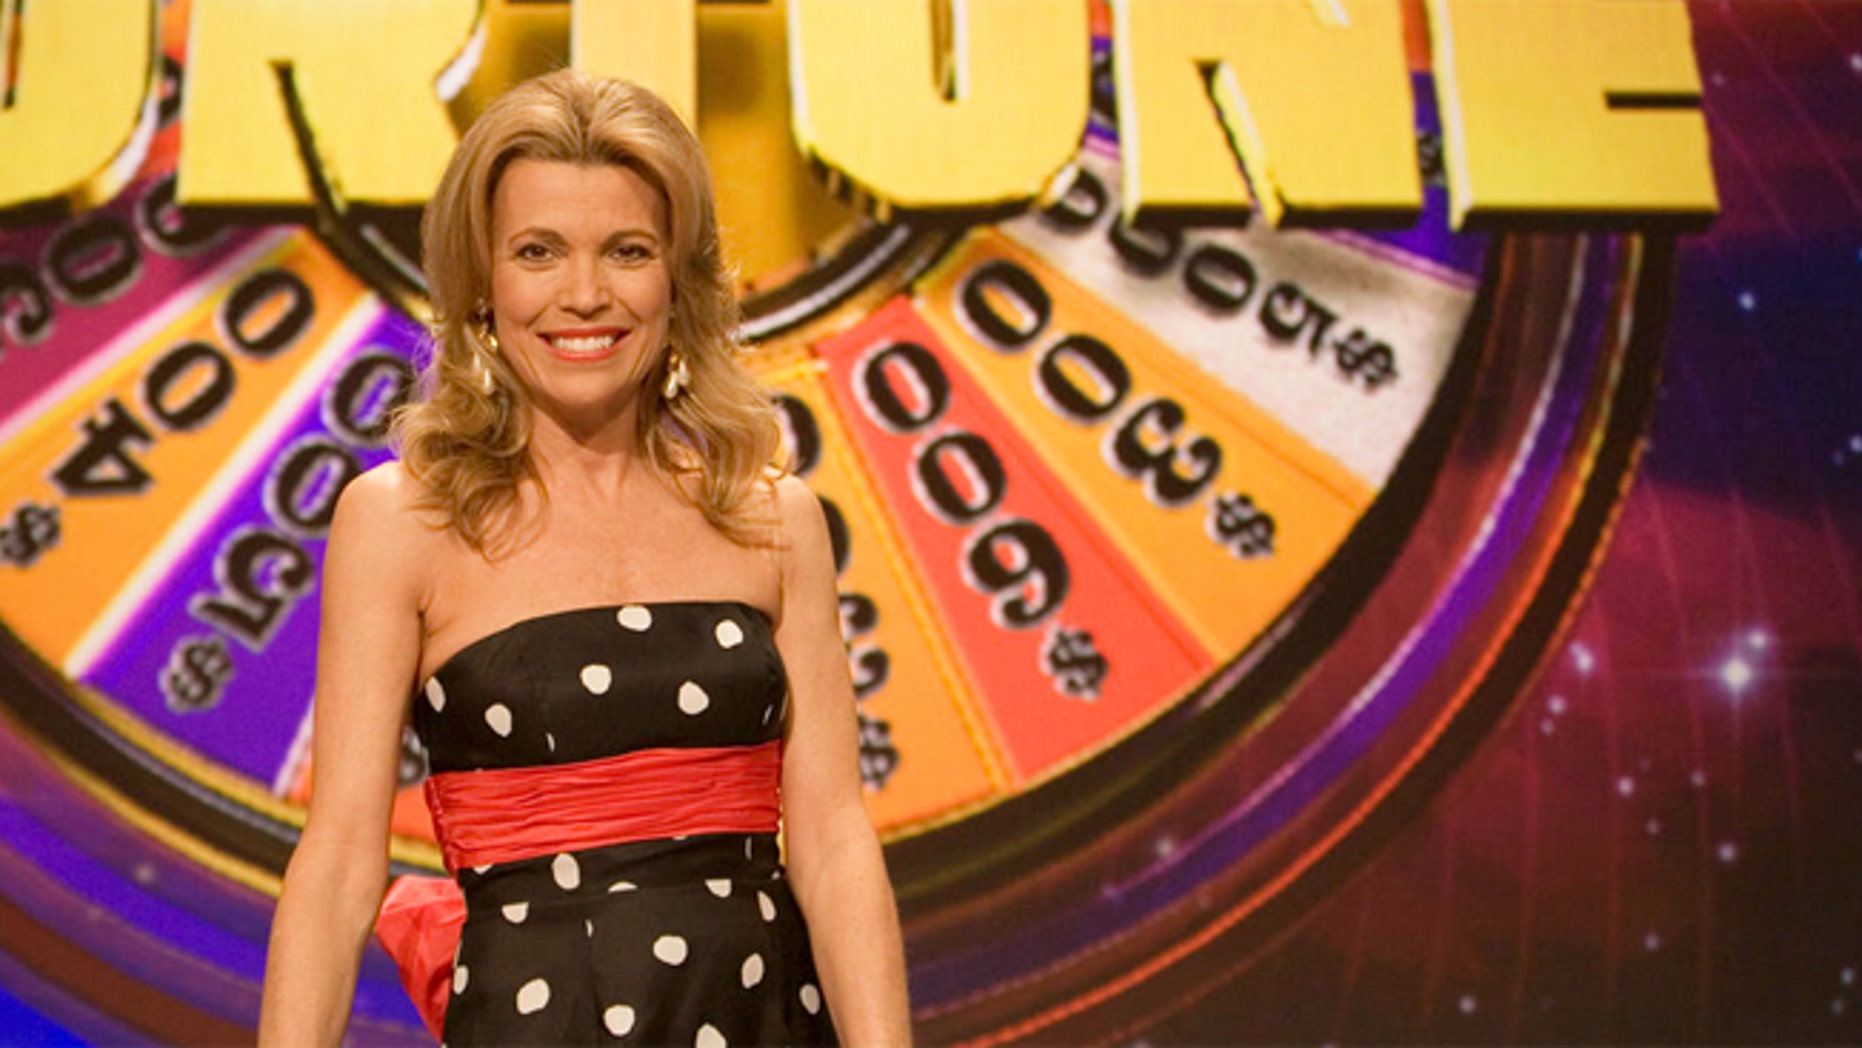 'Wheel of Fortune' player misses out on cruise with 'boozing' guess